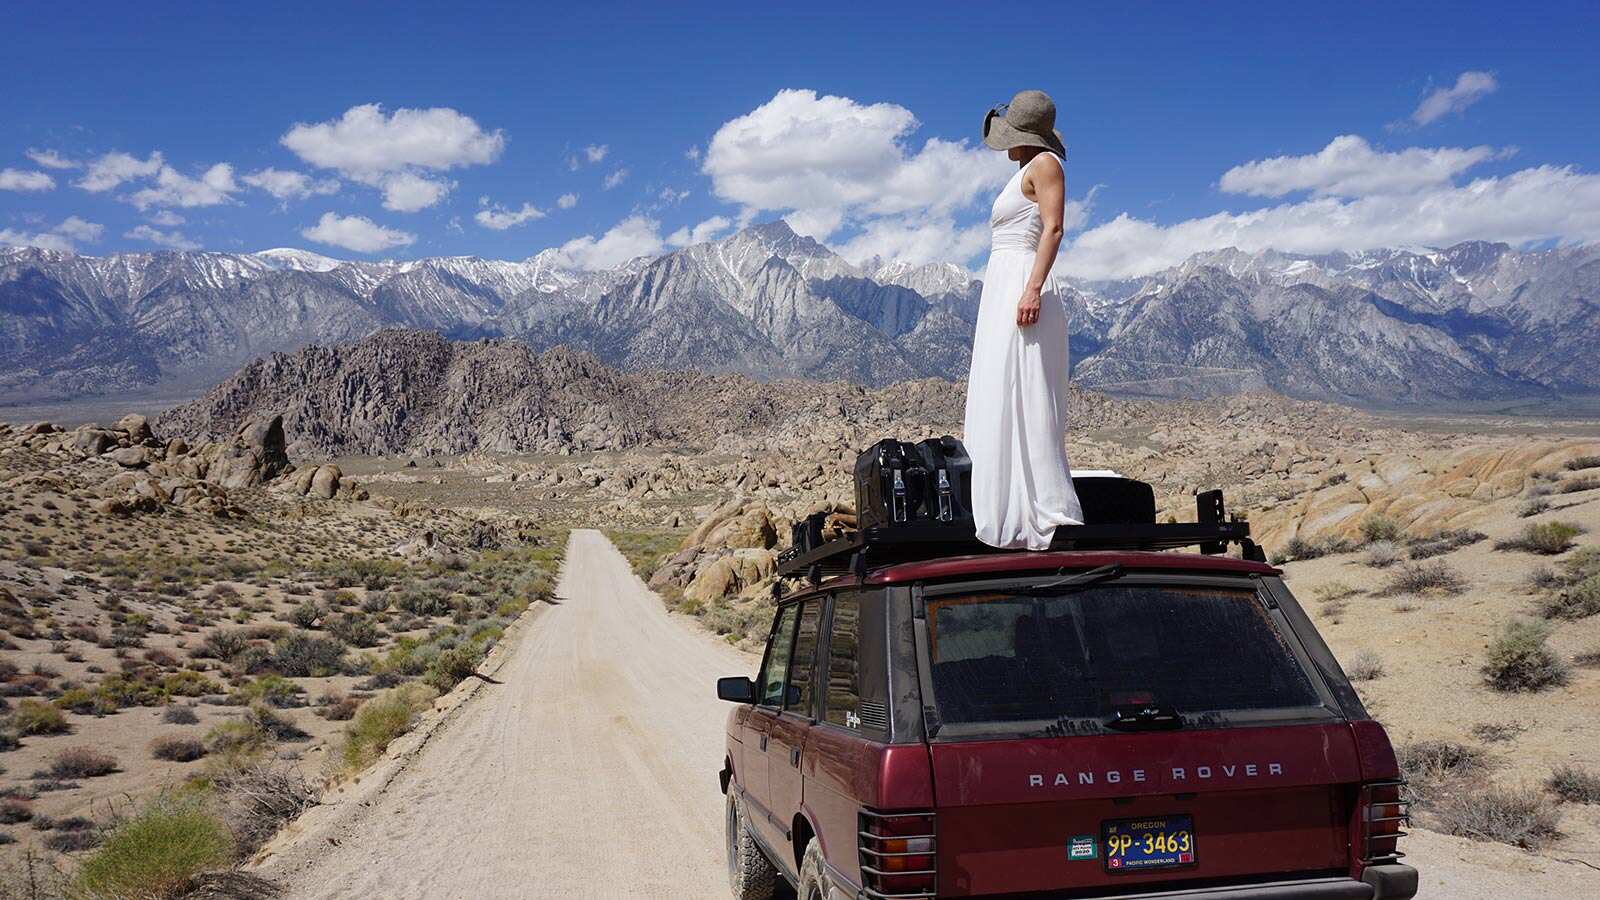 Range Rover A WEDDING OF EPIC PROPORTIONS